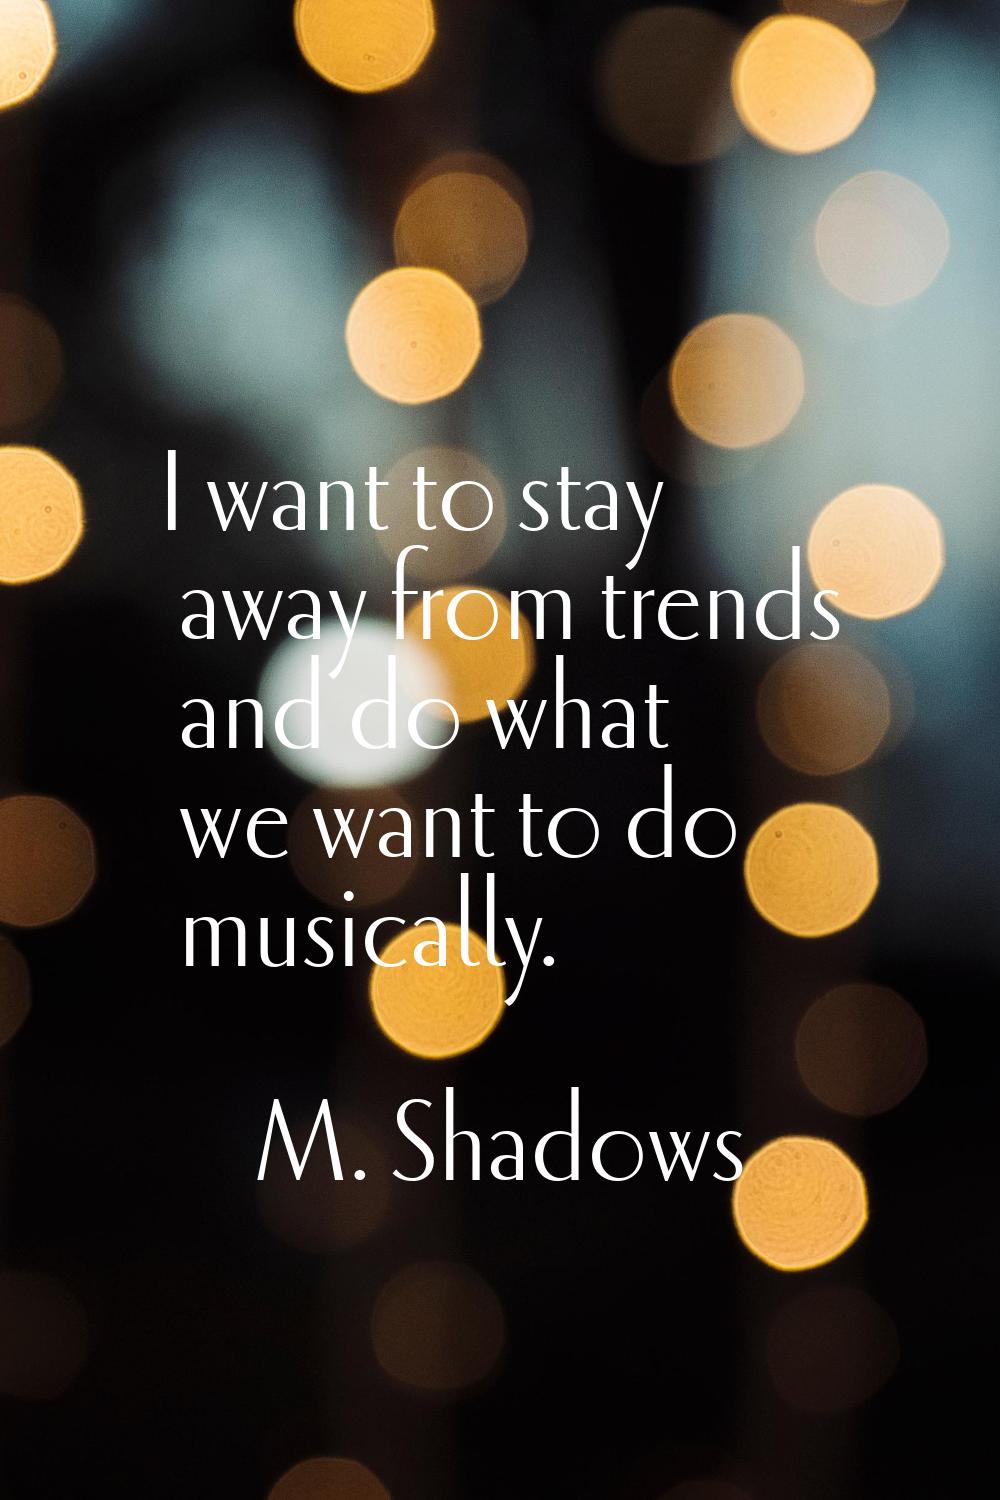 I want to stay away from trends and do what we want to do musically.